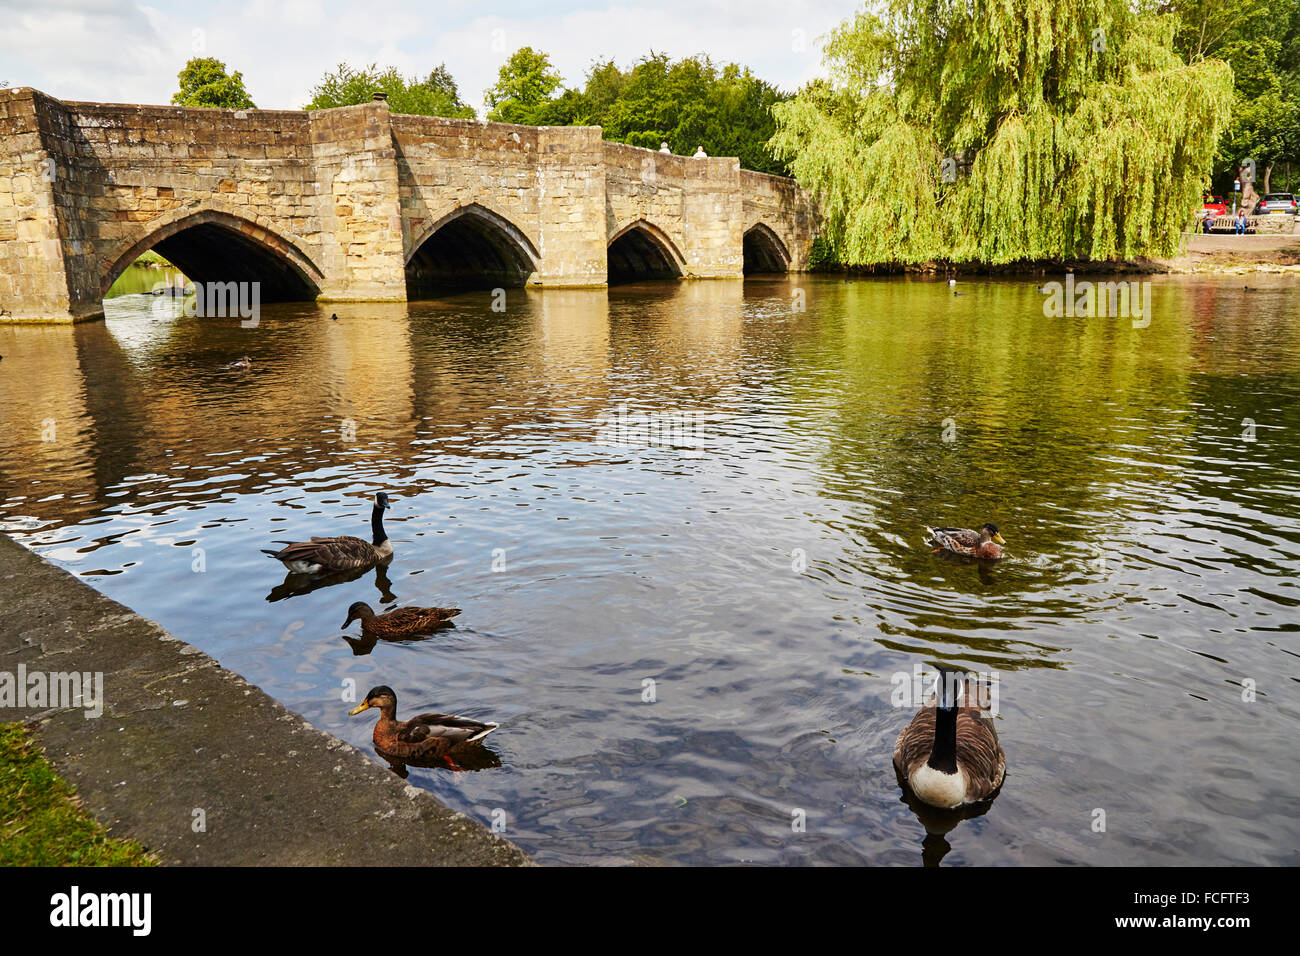 Canada geese and ducks at the old 13th century bridge over the River Wye, in Bakewell, Derbyshire, England, UK. Stock Photo